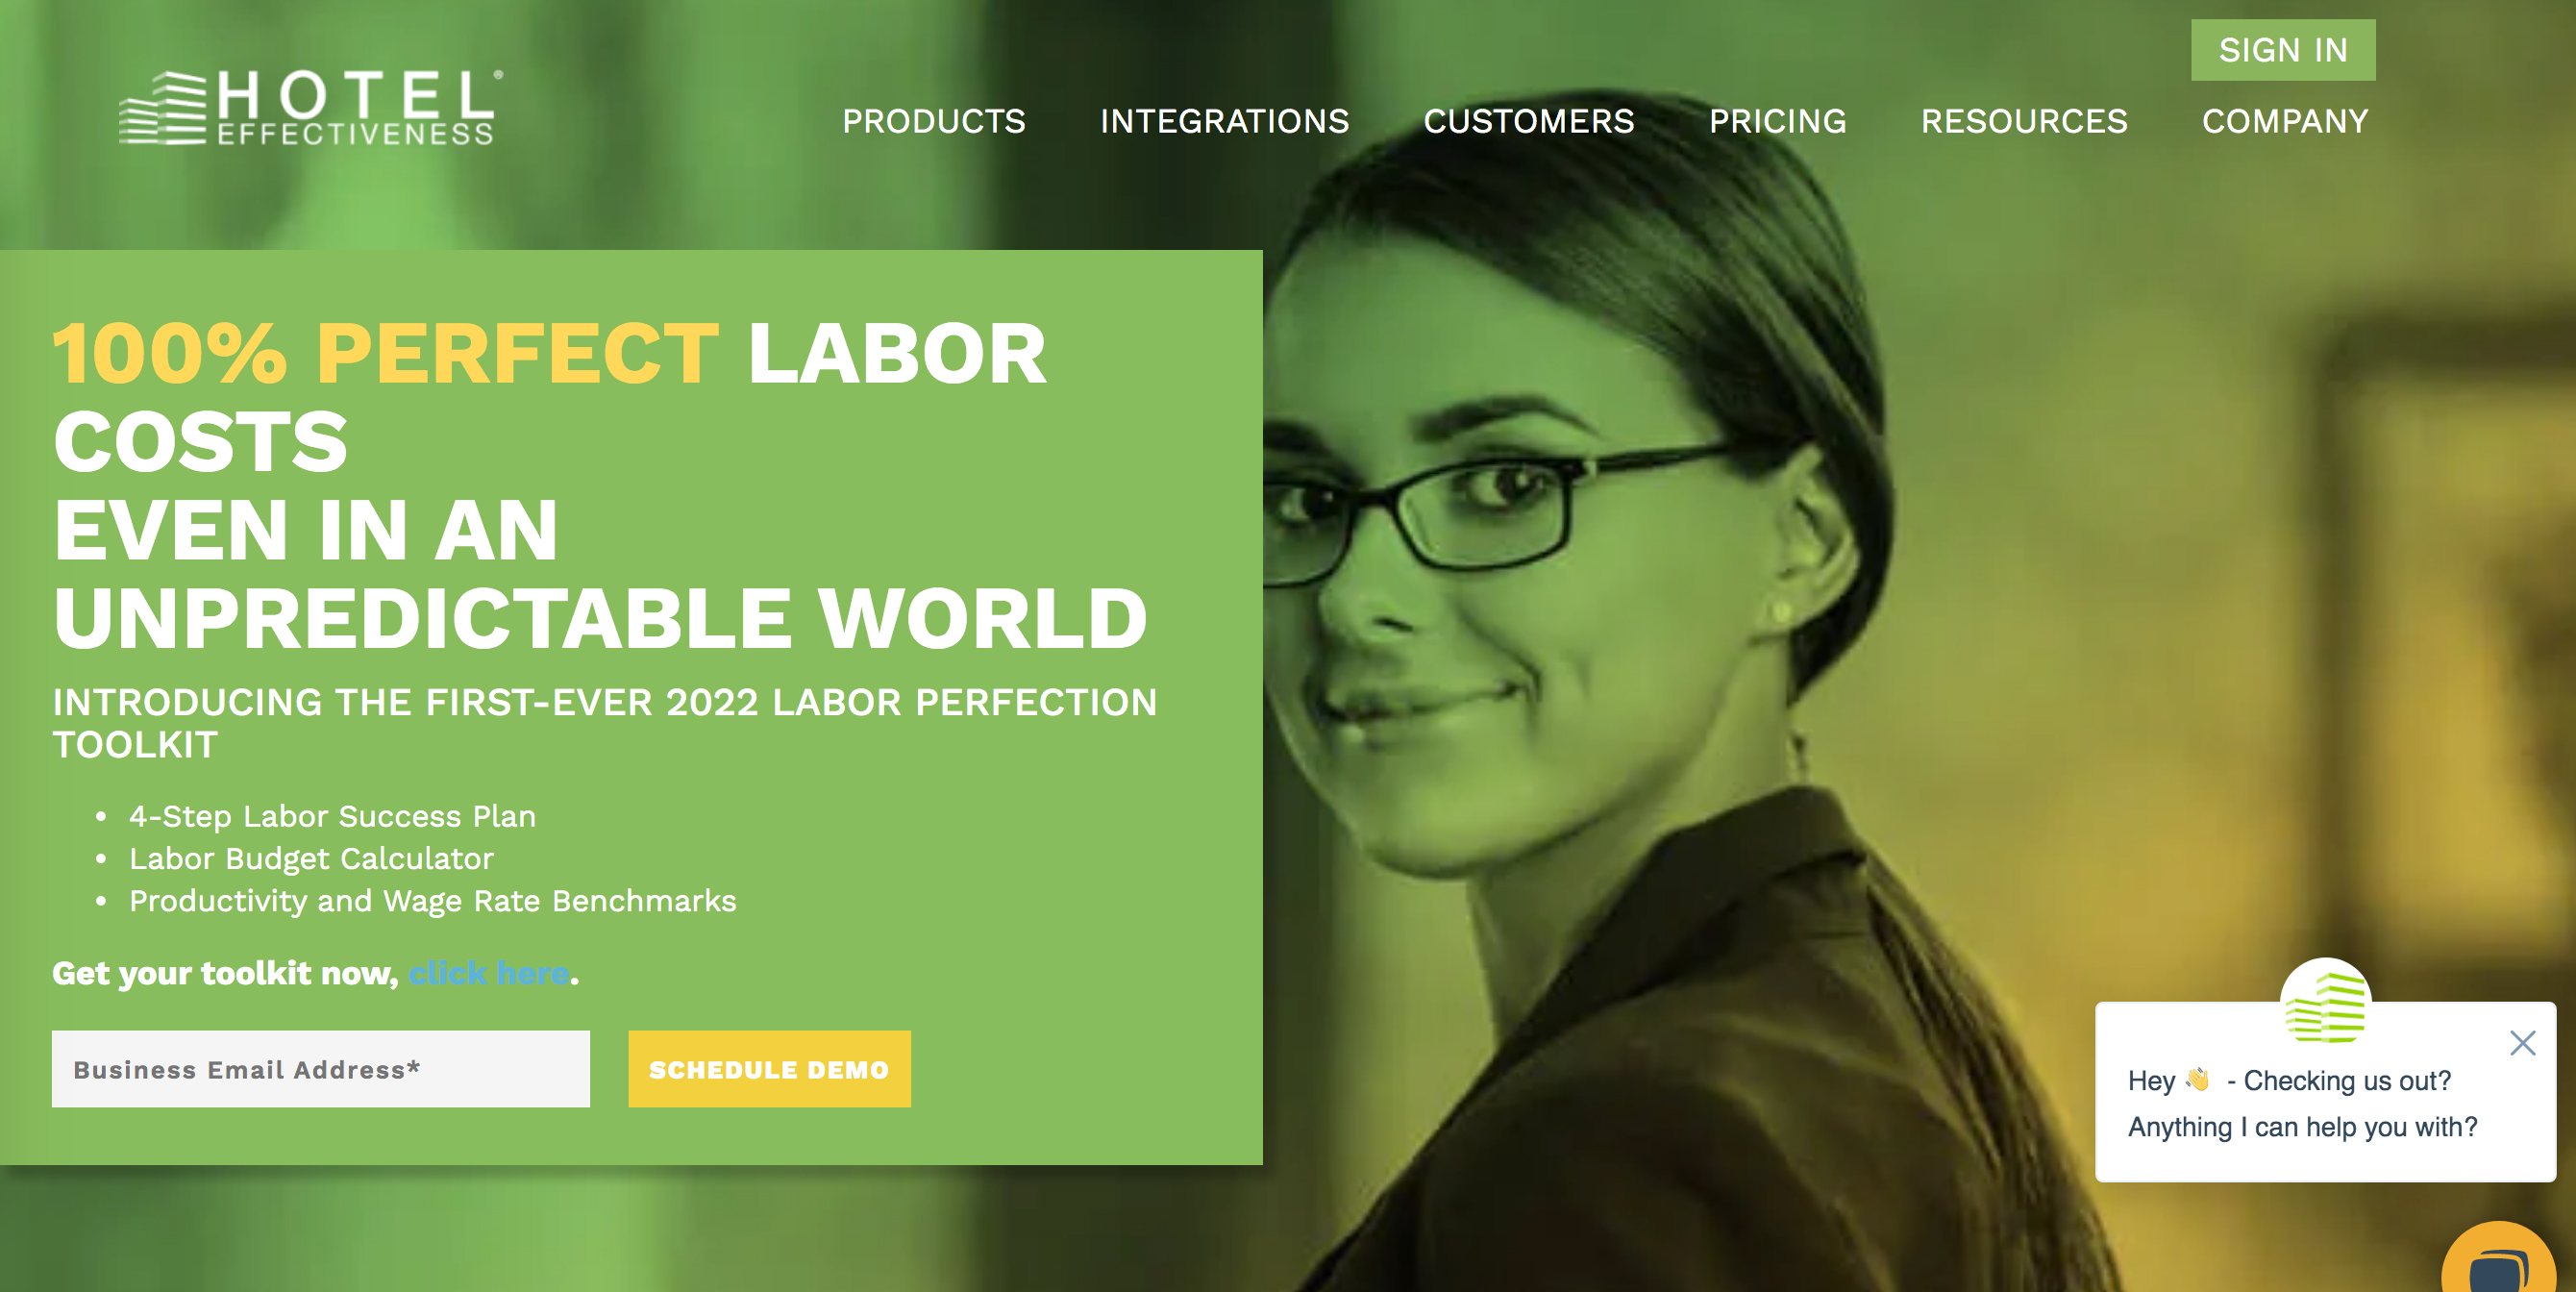 Hotel Effectiveness 2022 Labor Perfection Toolkit